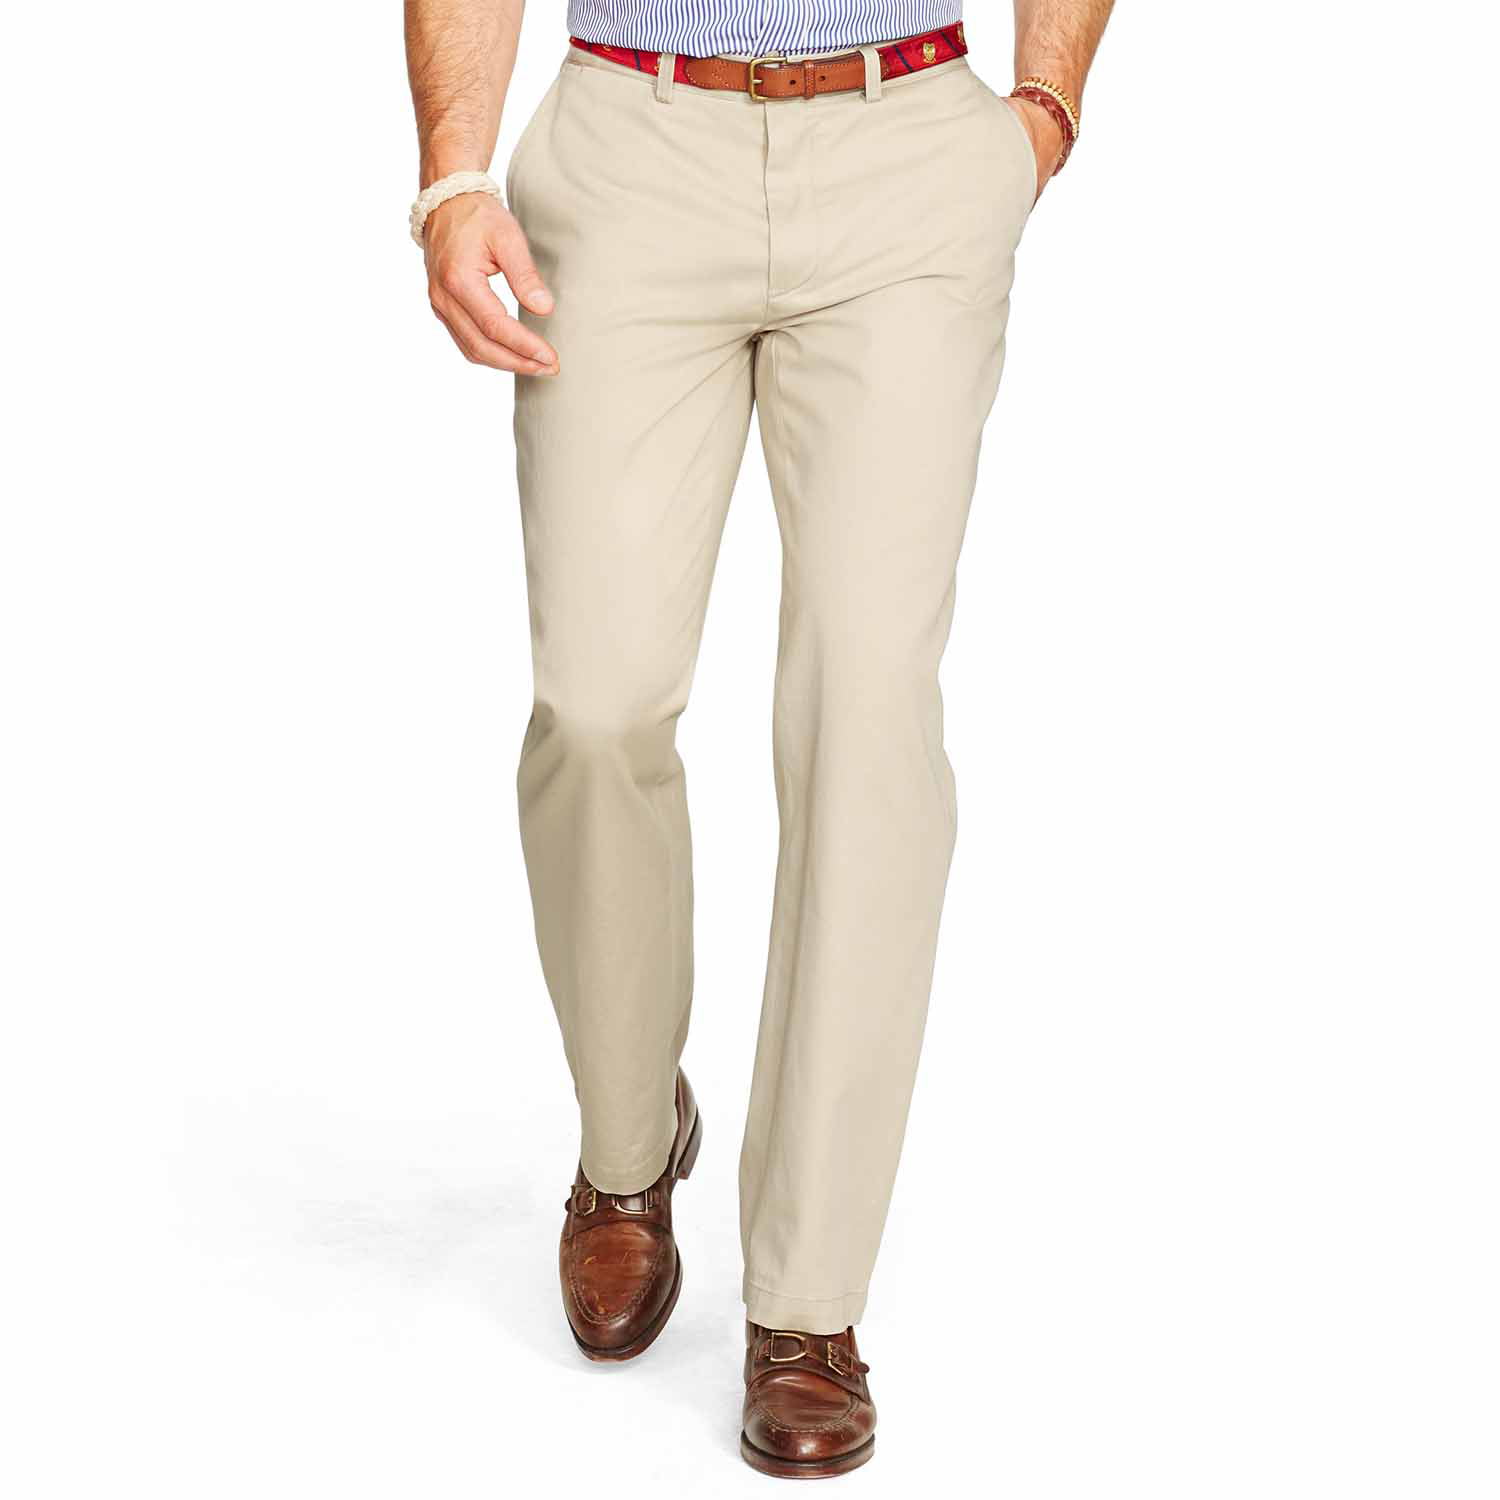 no pueden ver Ambigüedad Persona australiana Polo Ralph Lauren Mens Relaxed Fit Chino Pant (Classic Stone, 36x34) -  Walmart.com